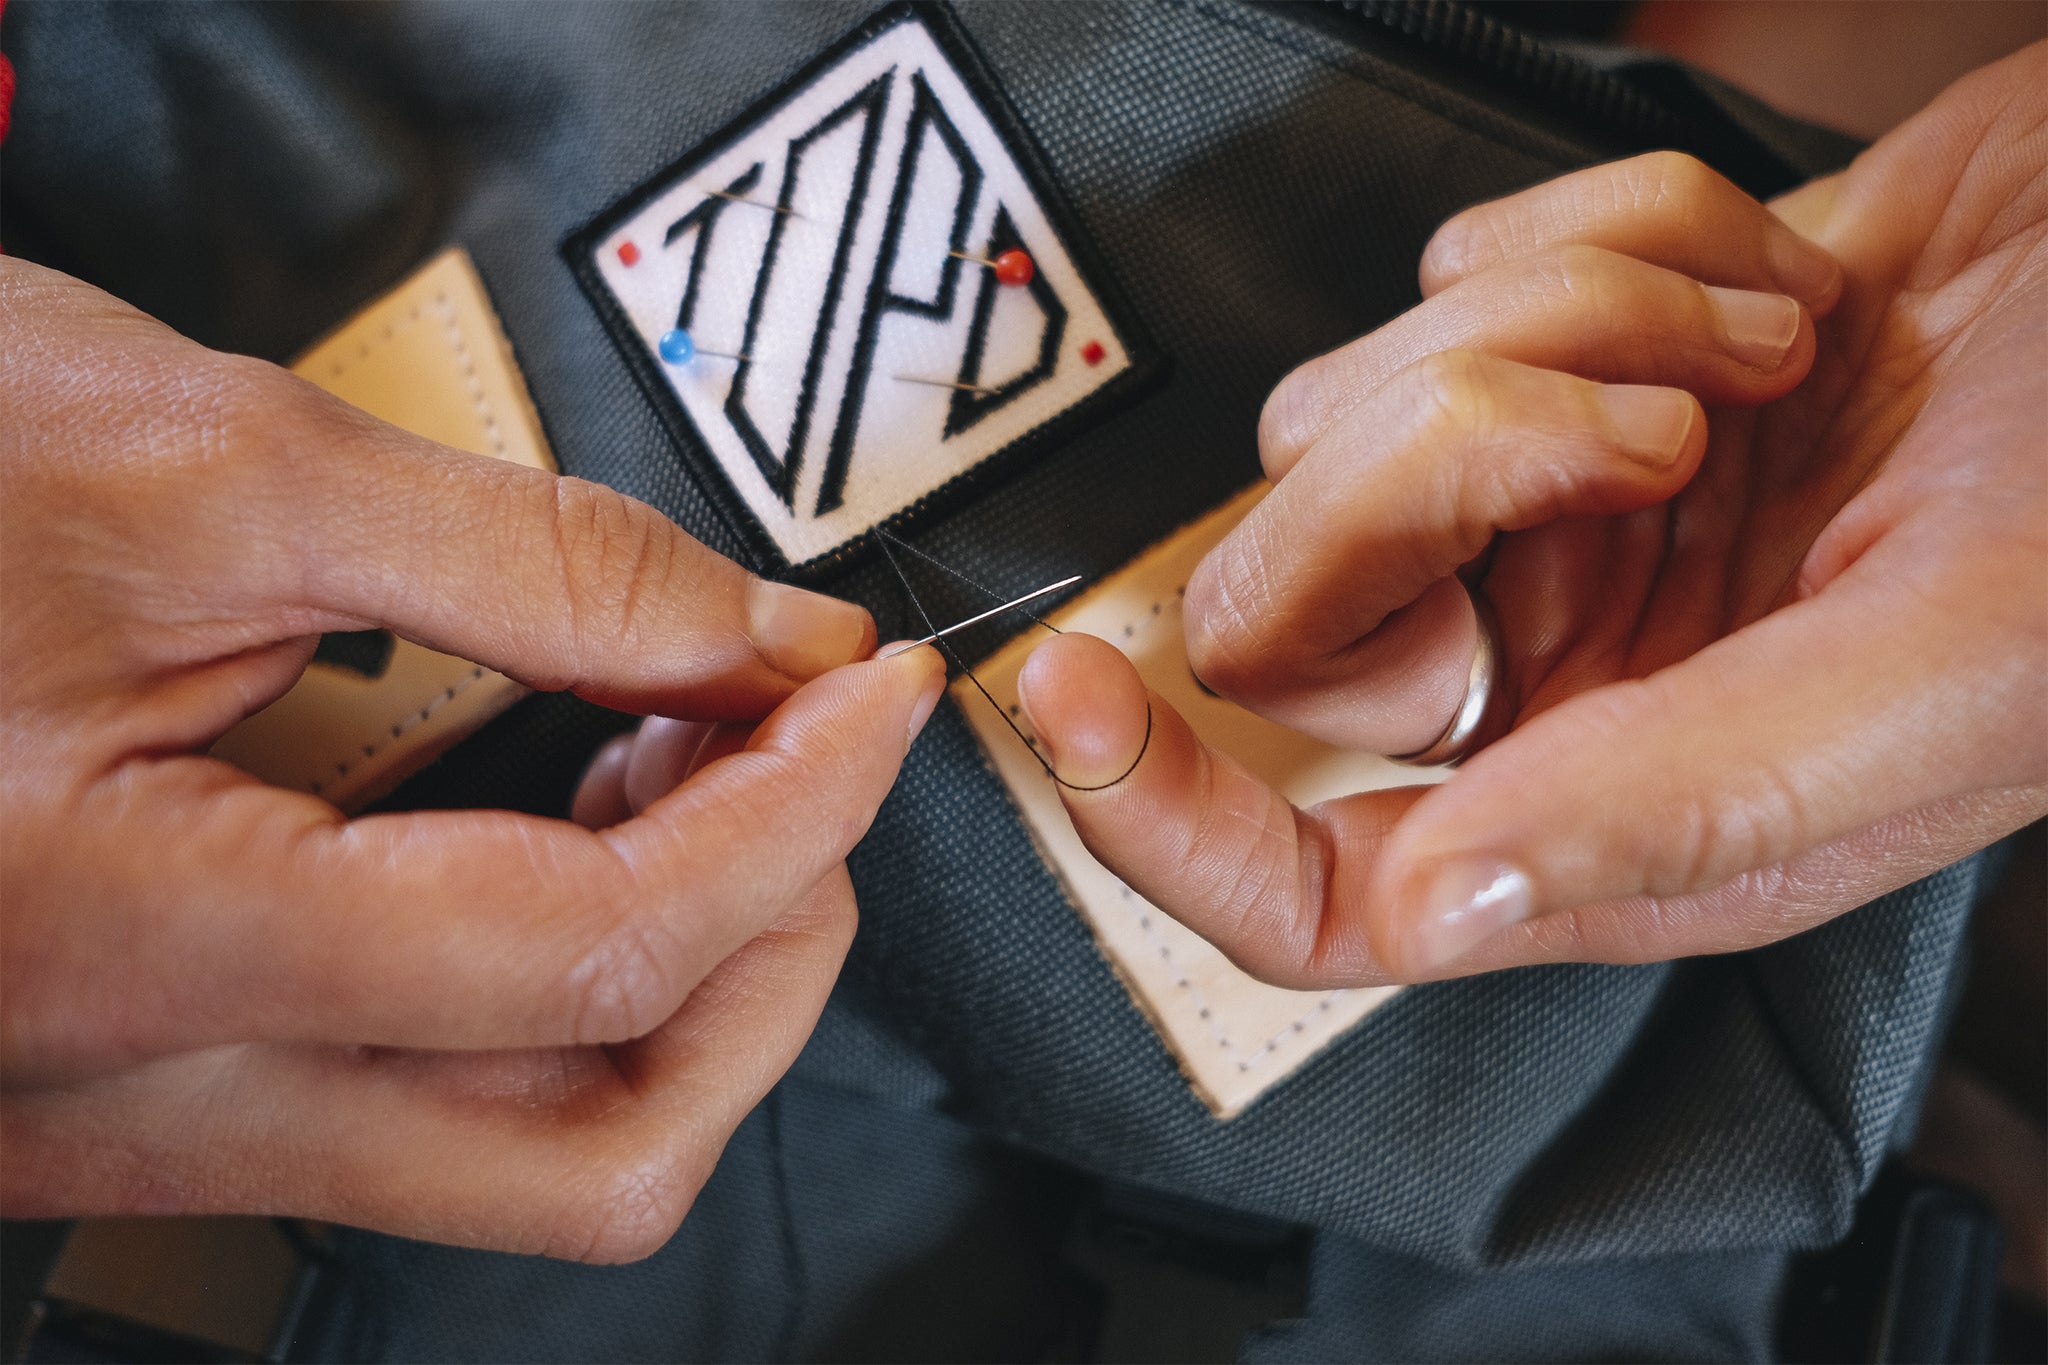 Insert the thread into the eye of the needle | Duffle Bag